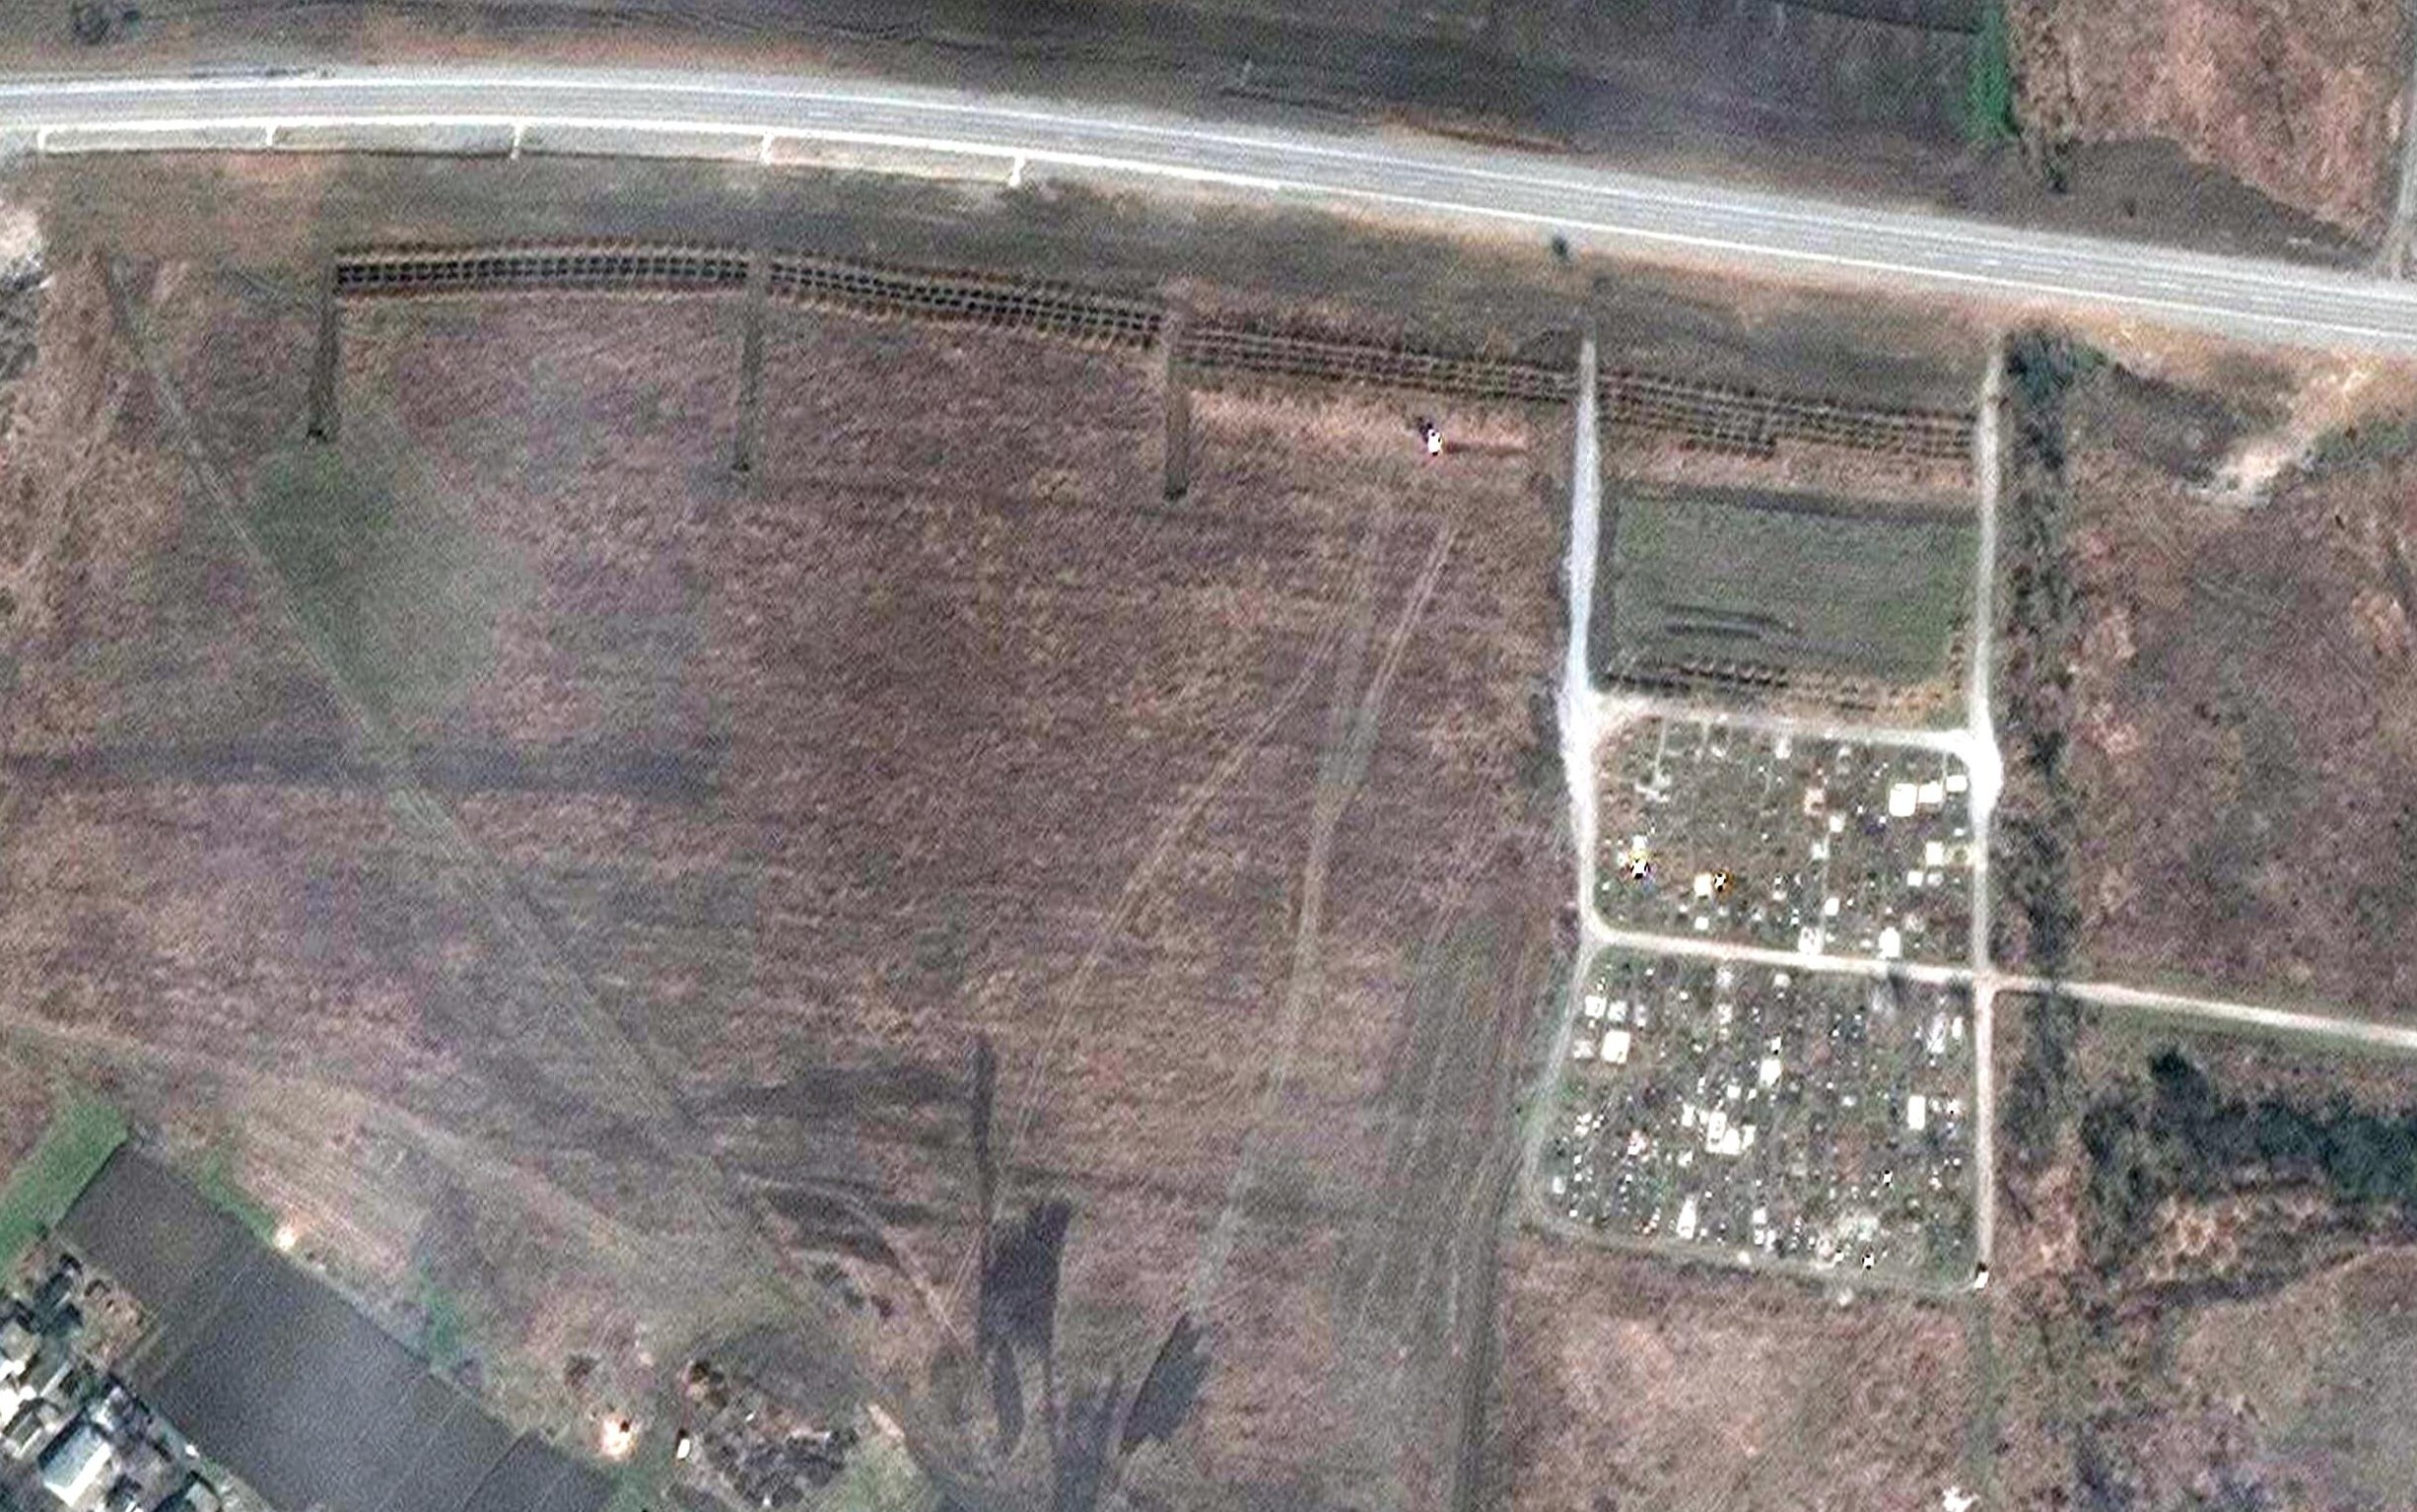 +++ RPT CON TITOLO DIVERSO +++ epa09900942 A handout satellite image made available by Maxar Technologies claims to show a mass grave site adjacent to an existing village cemetery on the northwestern edge of Manhush, some 20 kilometers west of Mariupol, Ukraine, 03 April 2022 (issued 21 April 2022). Maxar has reviewed satellite images from mid-March through mid-April, and indicate that the expansion of the new set of graves began between 23 to 26 March 2022 and continued to expand. The graves are aligned in four sections of linear rows (measuring approximately 85 meters per section) and contain more than 200 new graves, Maxar states.  EPA/MAXAR TECHNOLOGIES HANDOUT -- MANDATORY CREDIT: SATELLITE IMAGE 2022 MAXAR TECHNOLOGIES -- THE WATERMARK MAY NOT BE REMOVED/CROPPED -- HANDOUT EDITORIAL USE ONLY/NO SALES